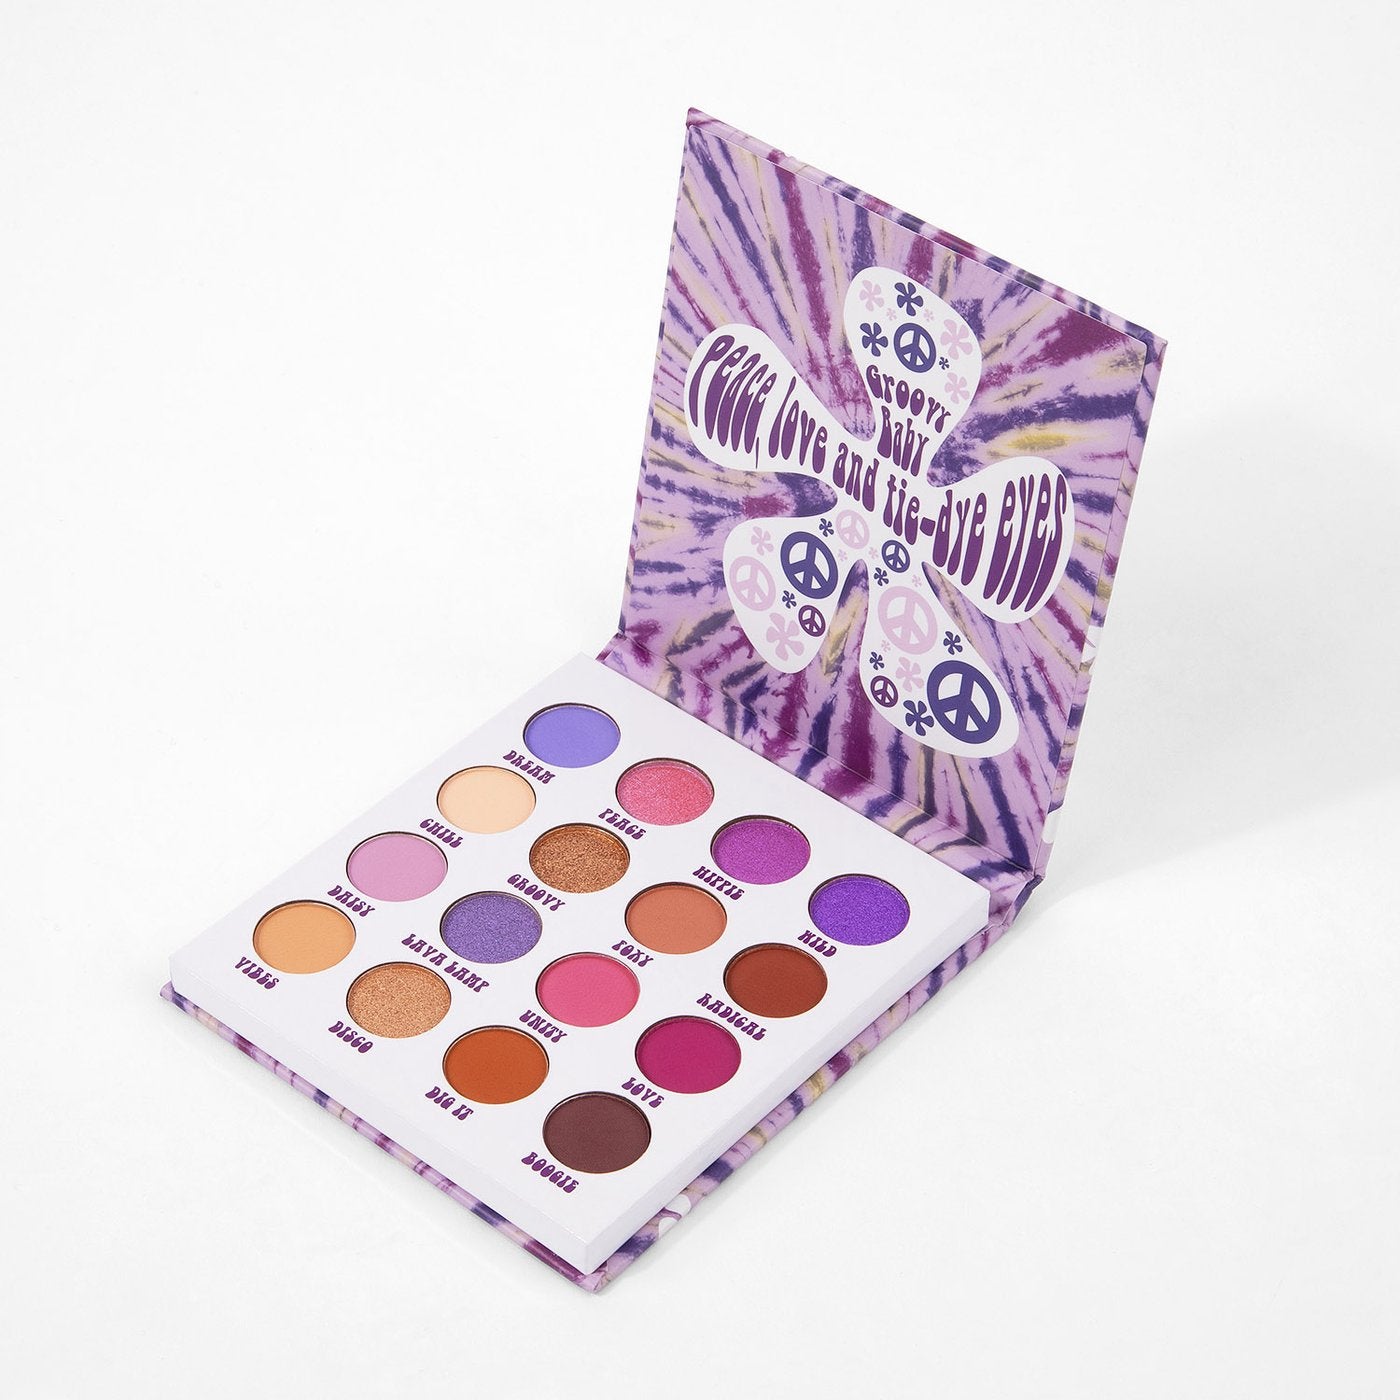 a flower power themed eyeshadow palette with 16 different colors